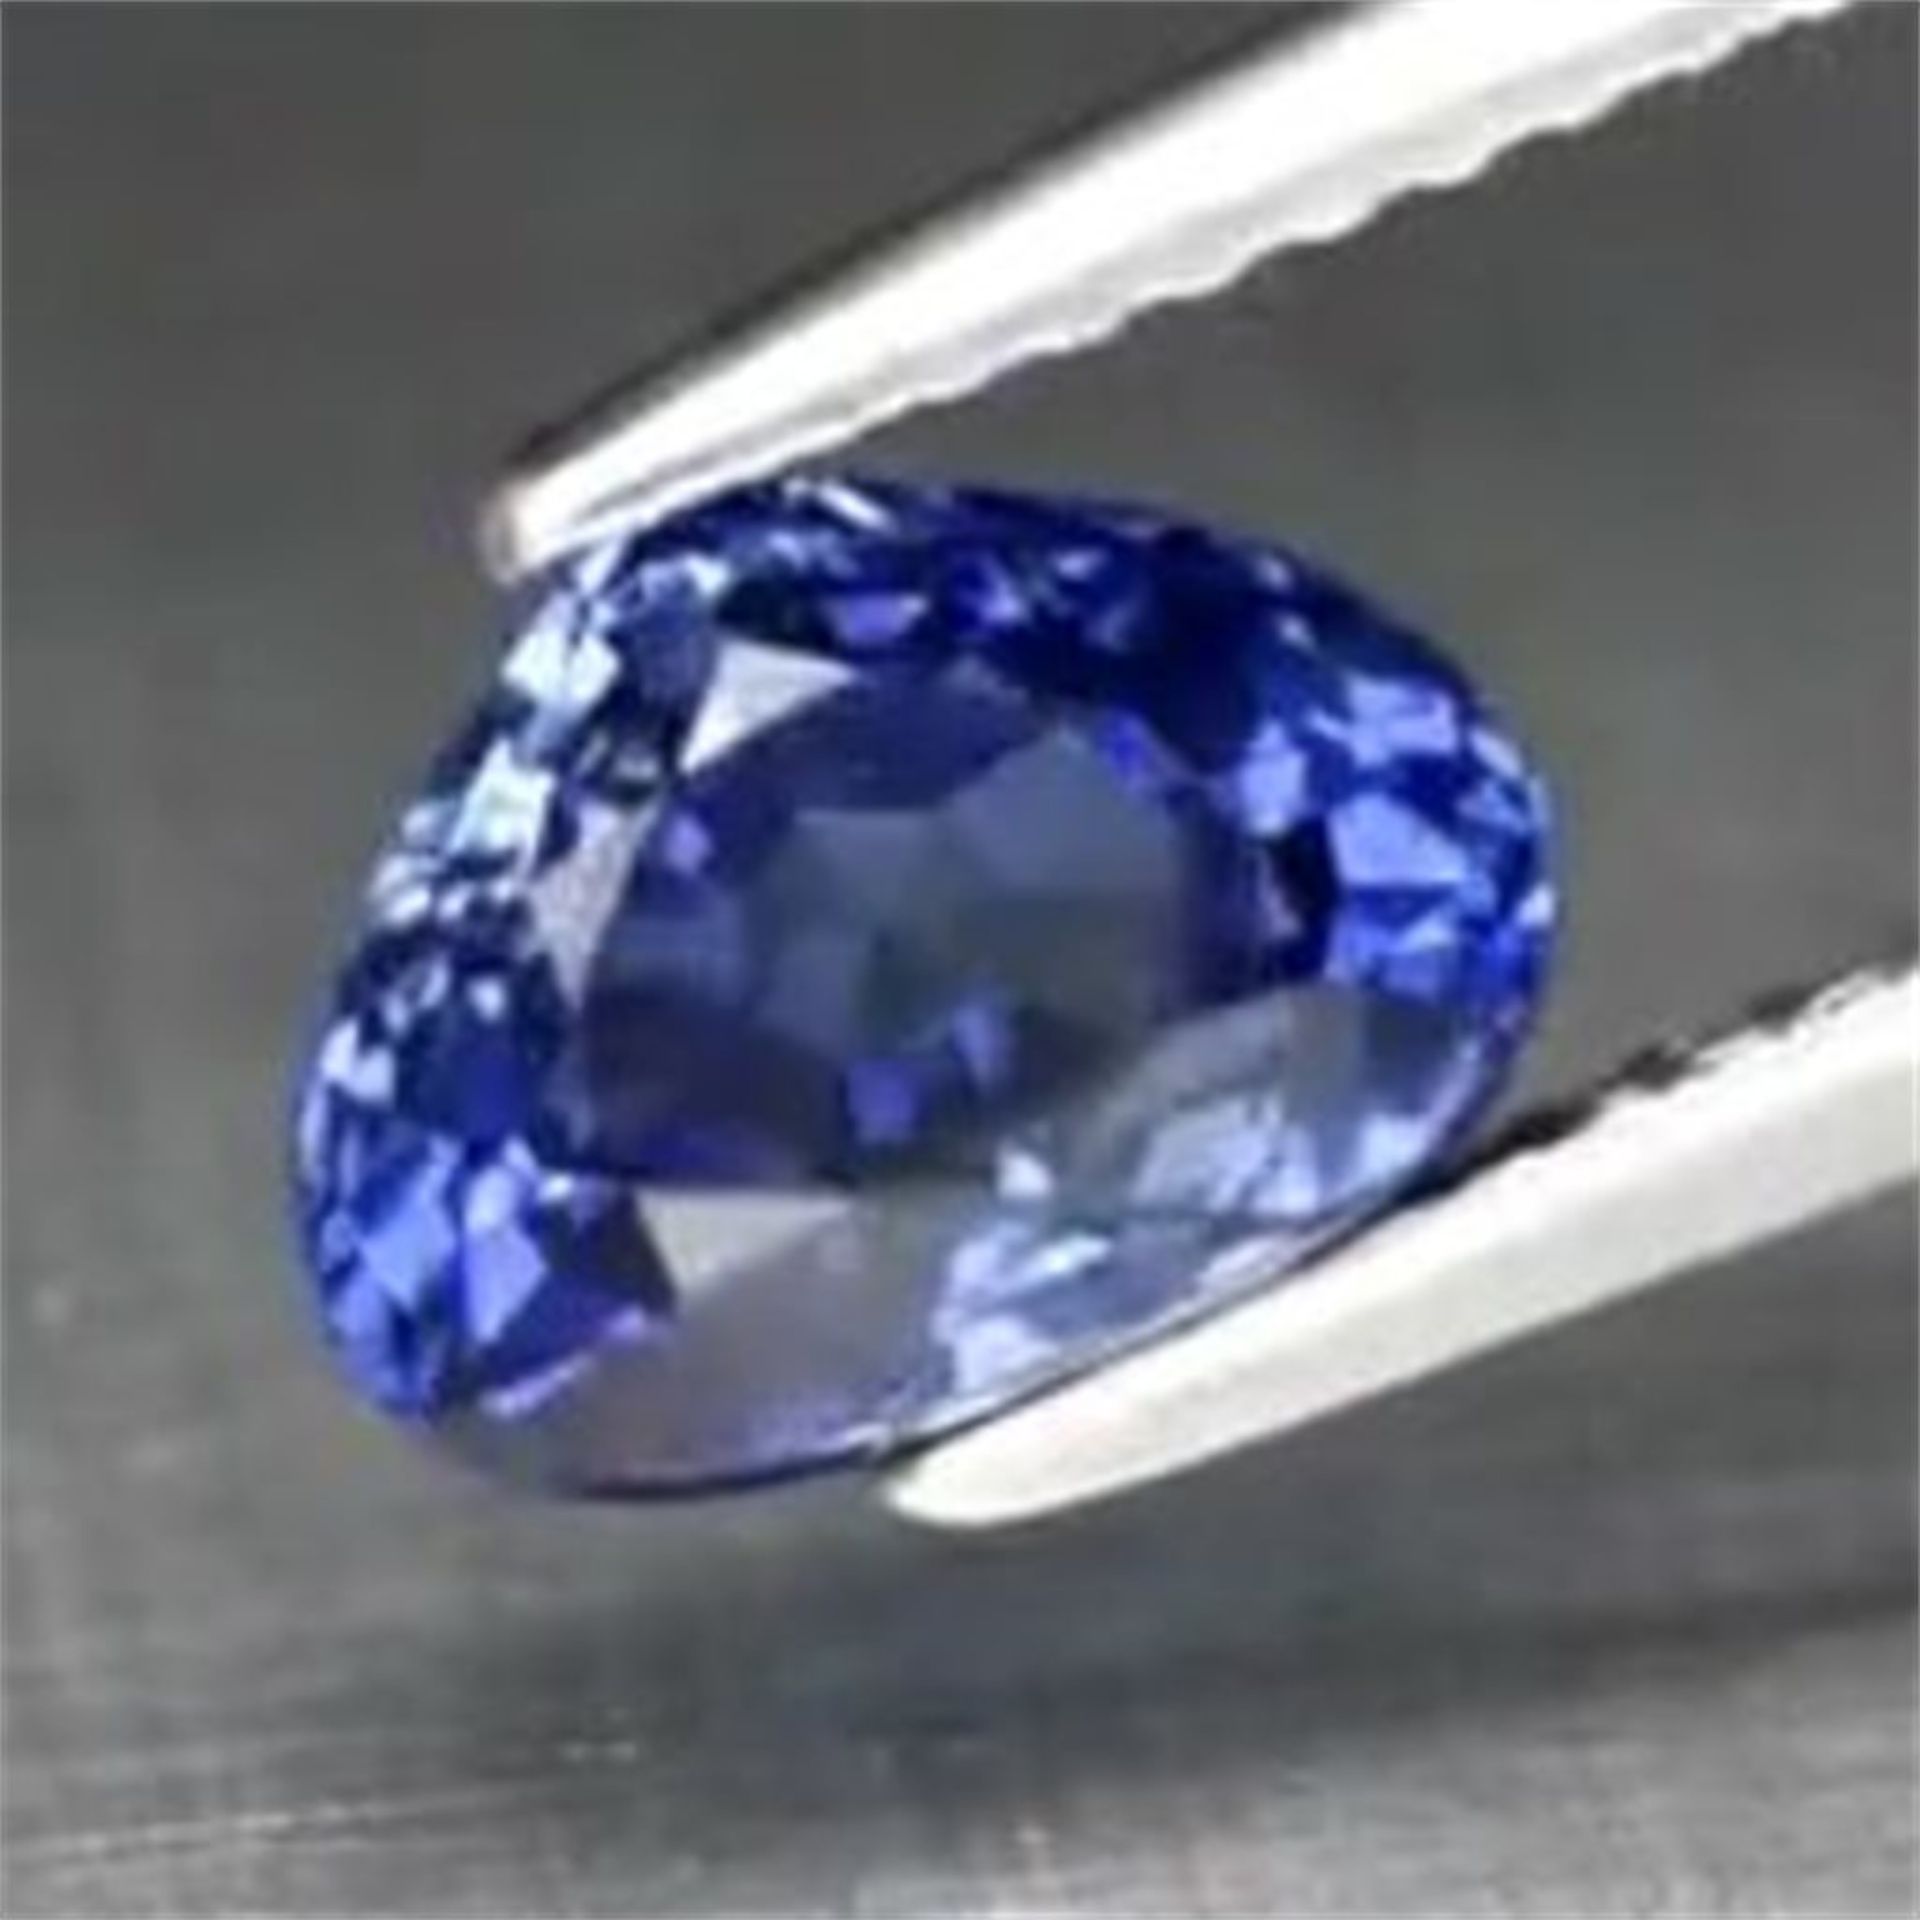 GIA Certified 2.08 ct. Blue Sapphire - Image 4 of 10